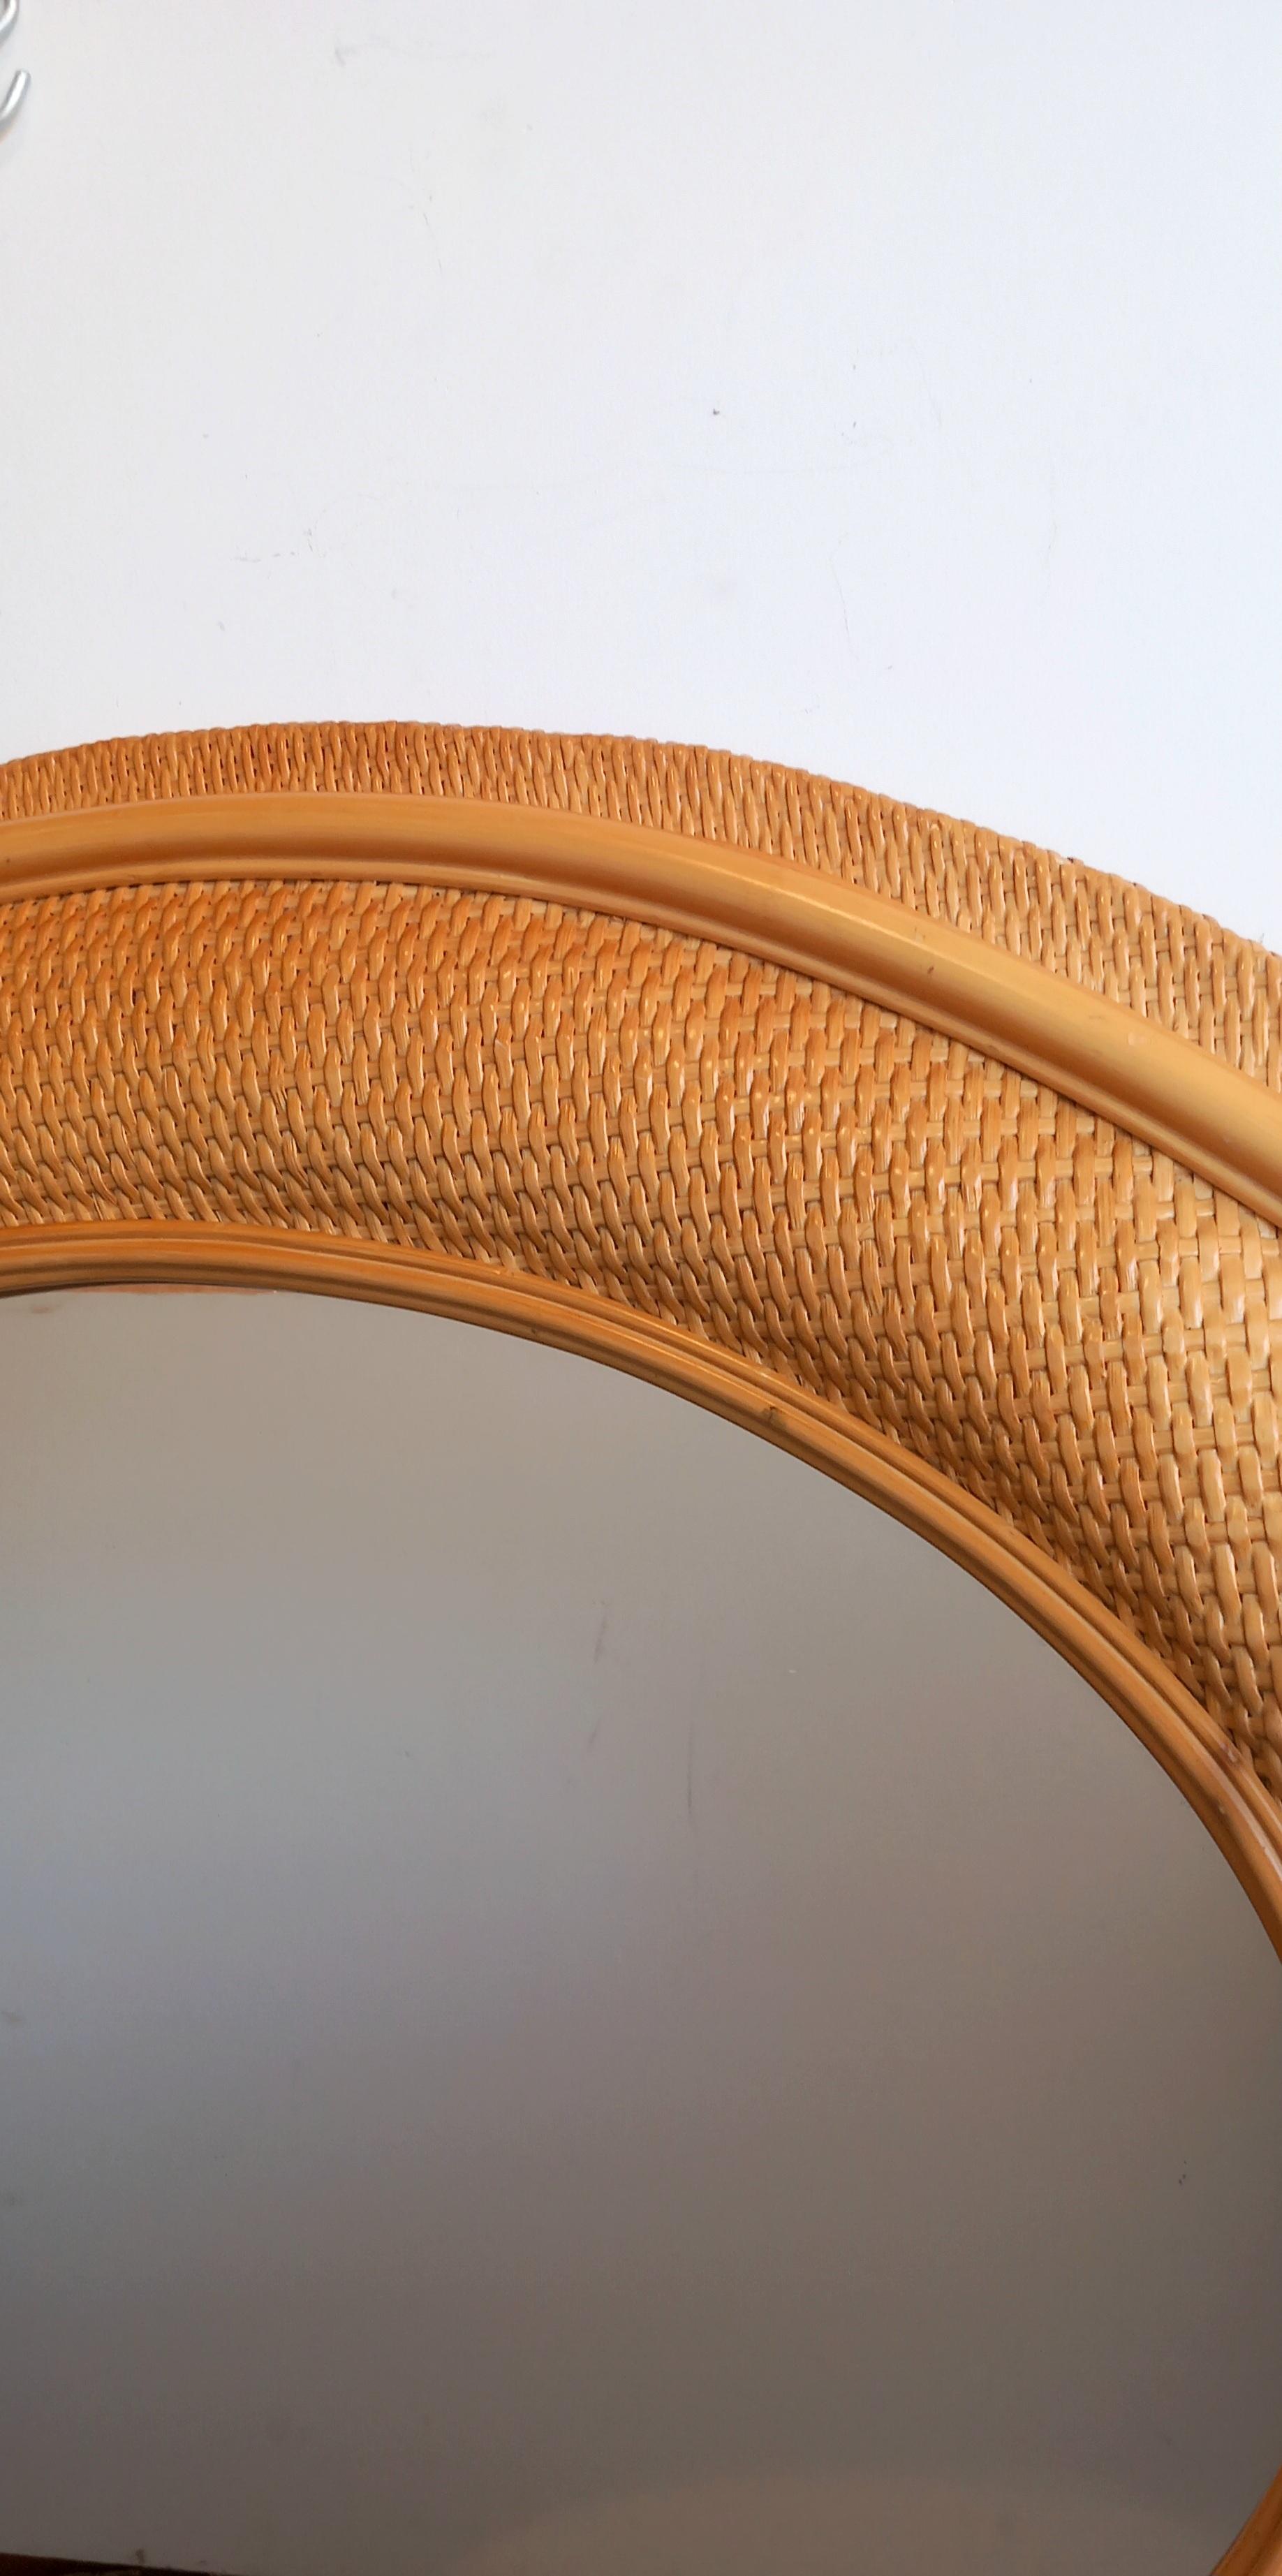 20th Century Mirrors Rattan Rare Extra Large Oval  Mid-20th  Century 120x91 cm For Sale